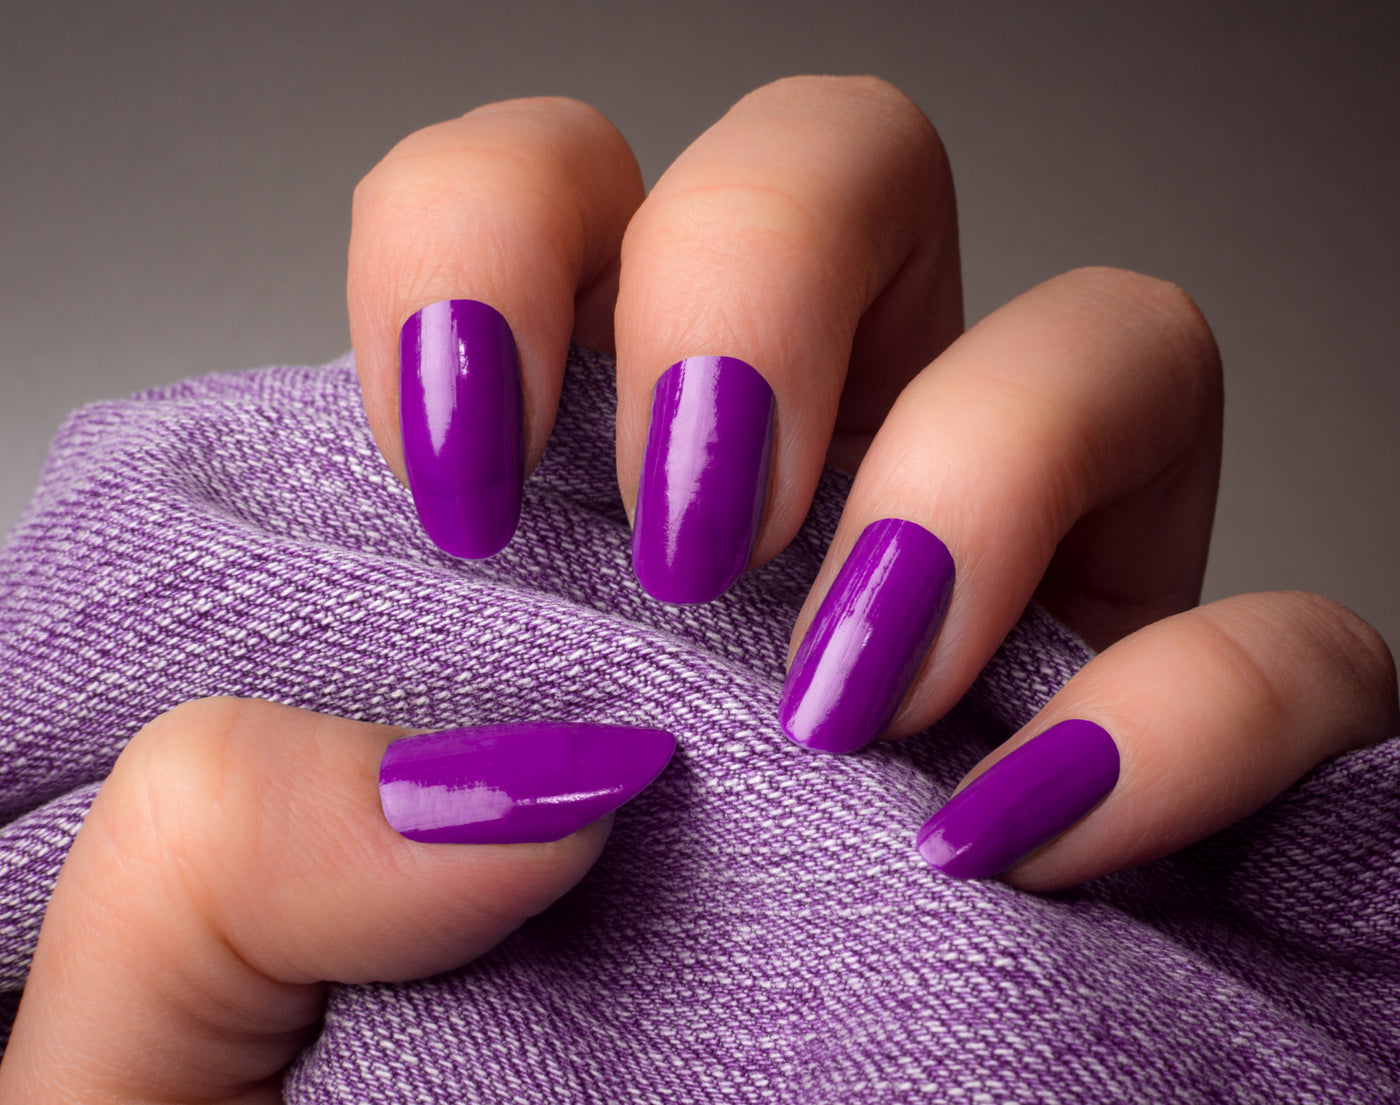 5 Tips To Care For Your Acrylic Nails At Home - The Nail Bar Beauty & Co.